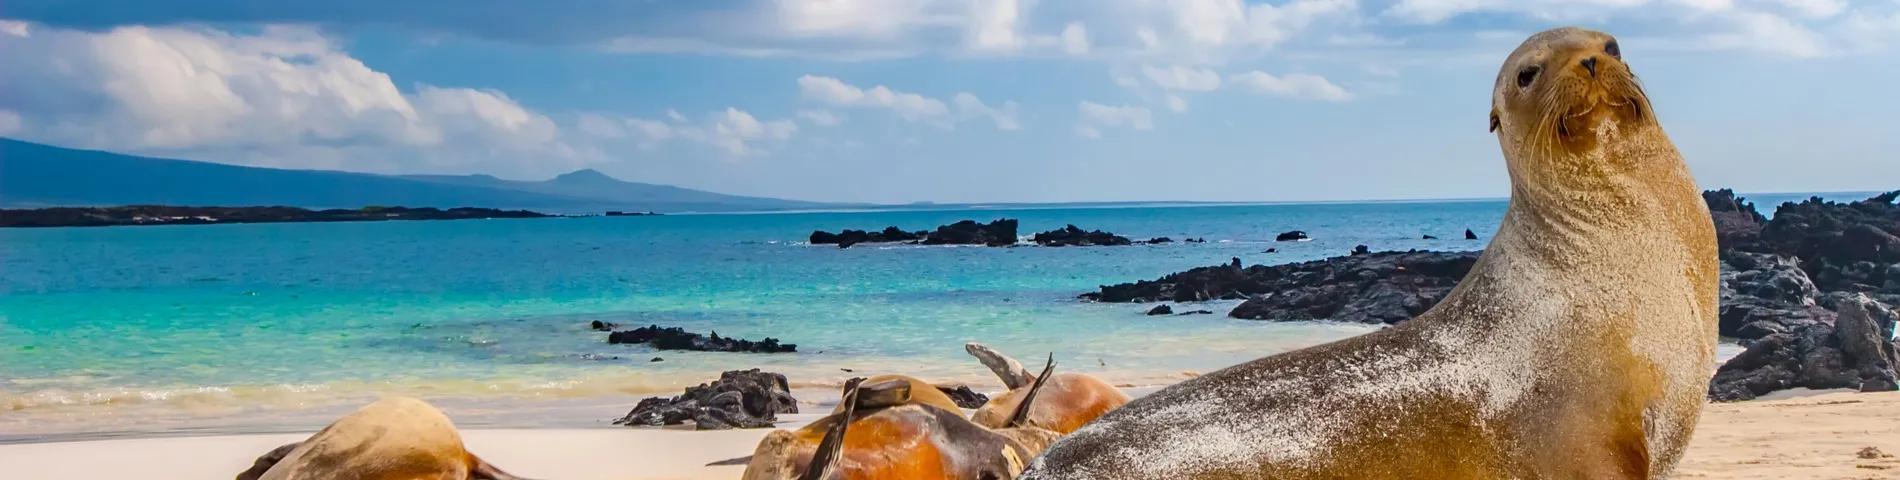 Isole Galapagos - 